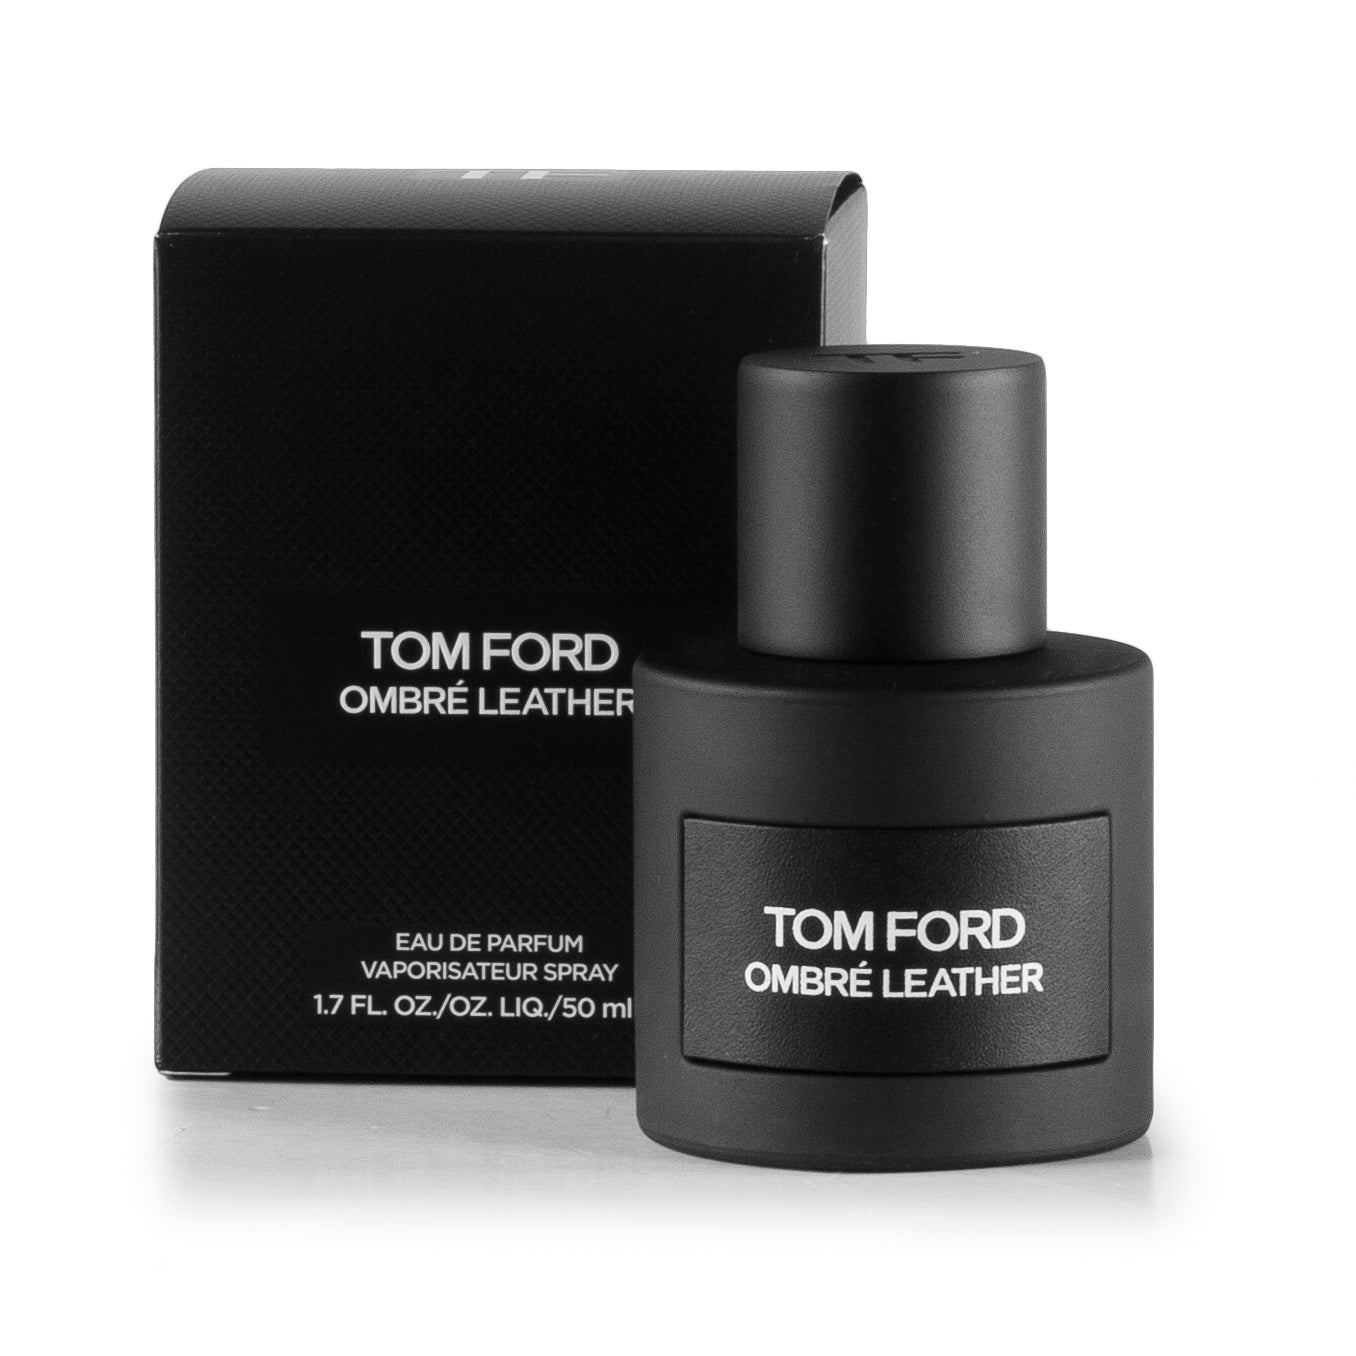 Ombre Leather Eau de Parfum Spray for Men by Tom Ford 1.7 oz. Click to open in modal